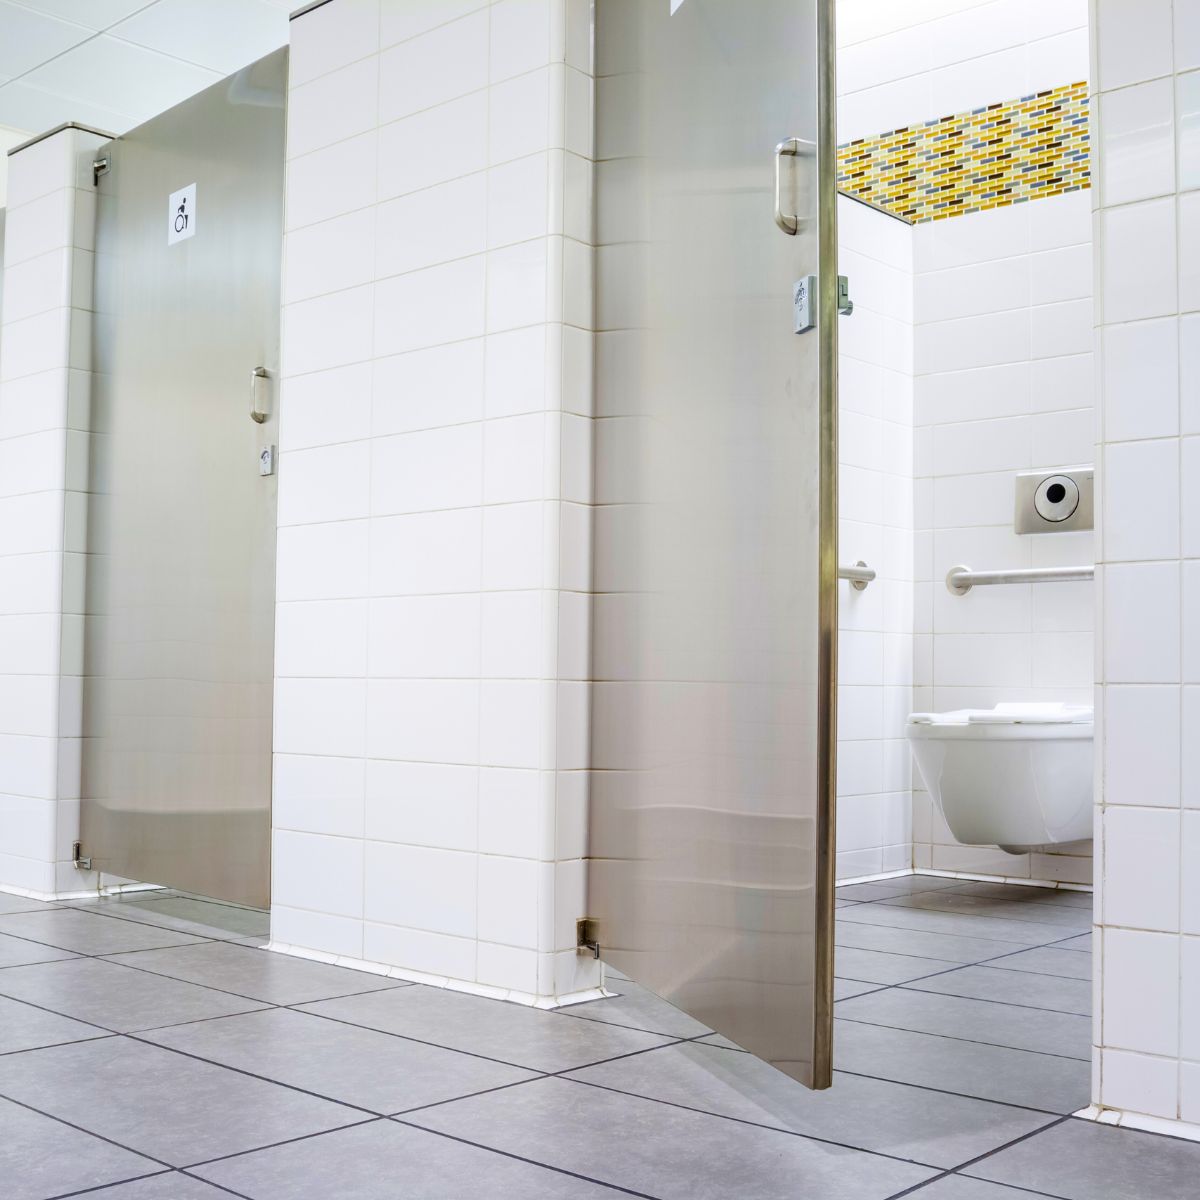 You are currently viewing Tips for cleaning public restrooms effectively